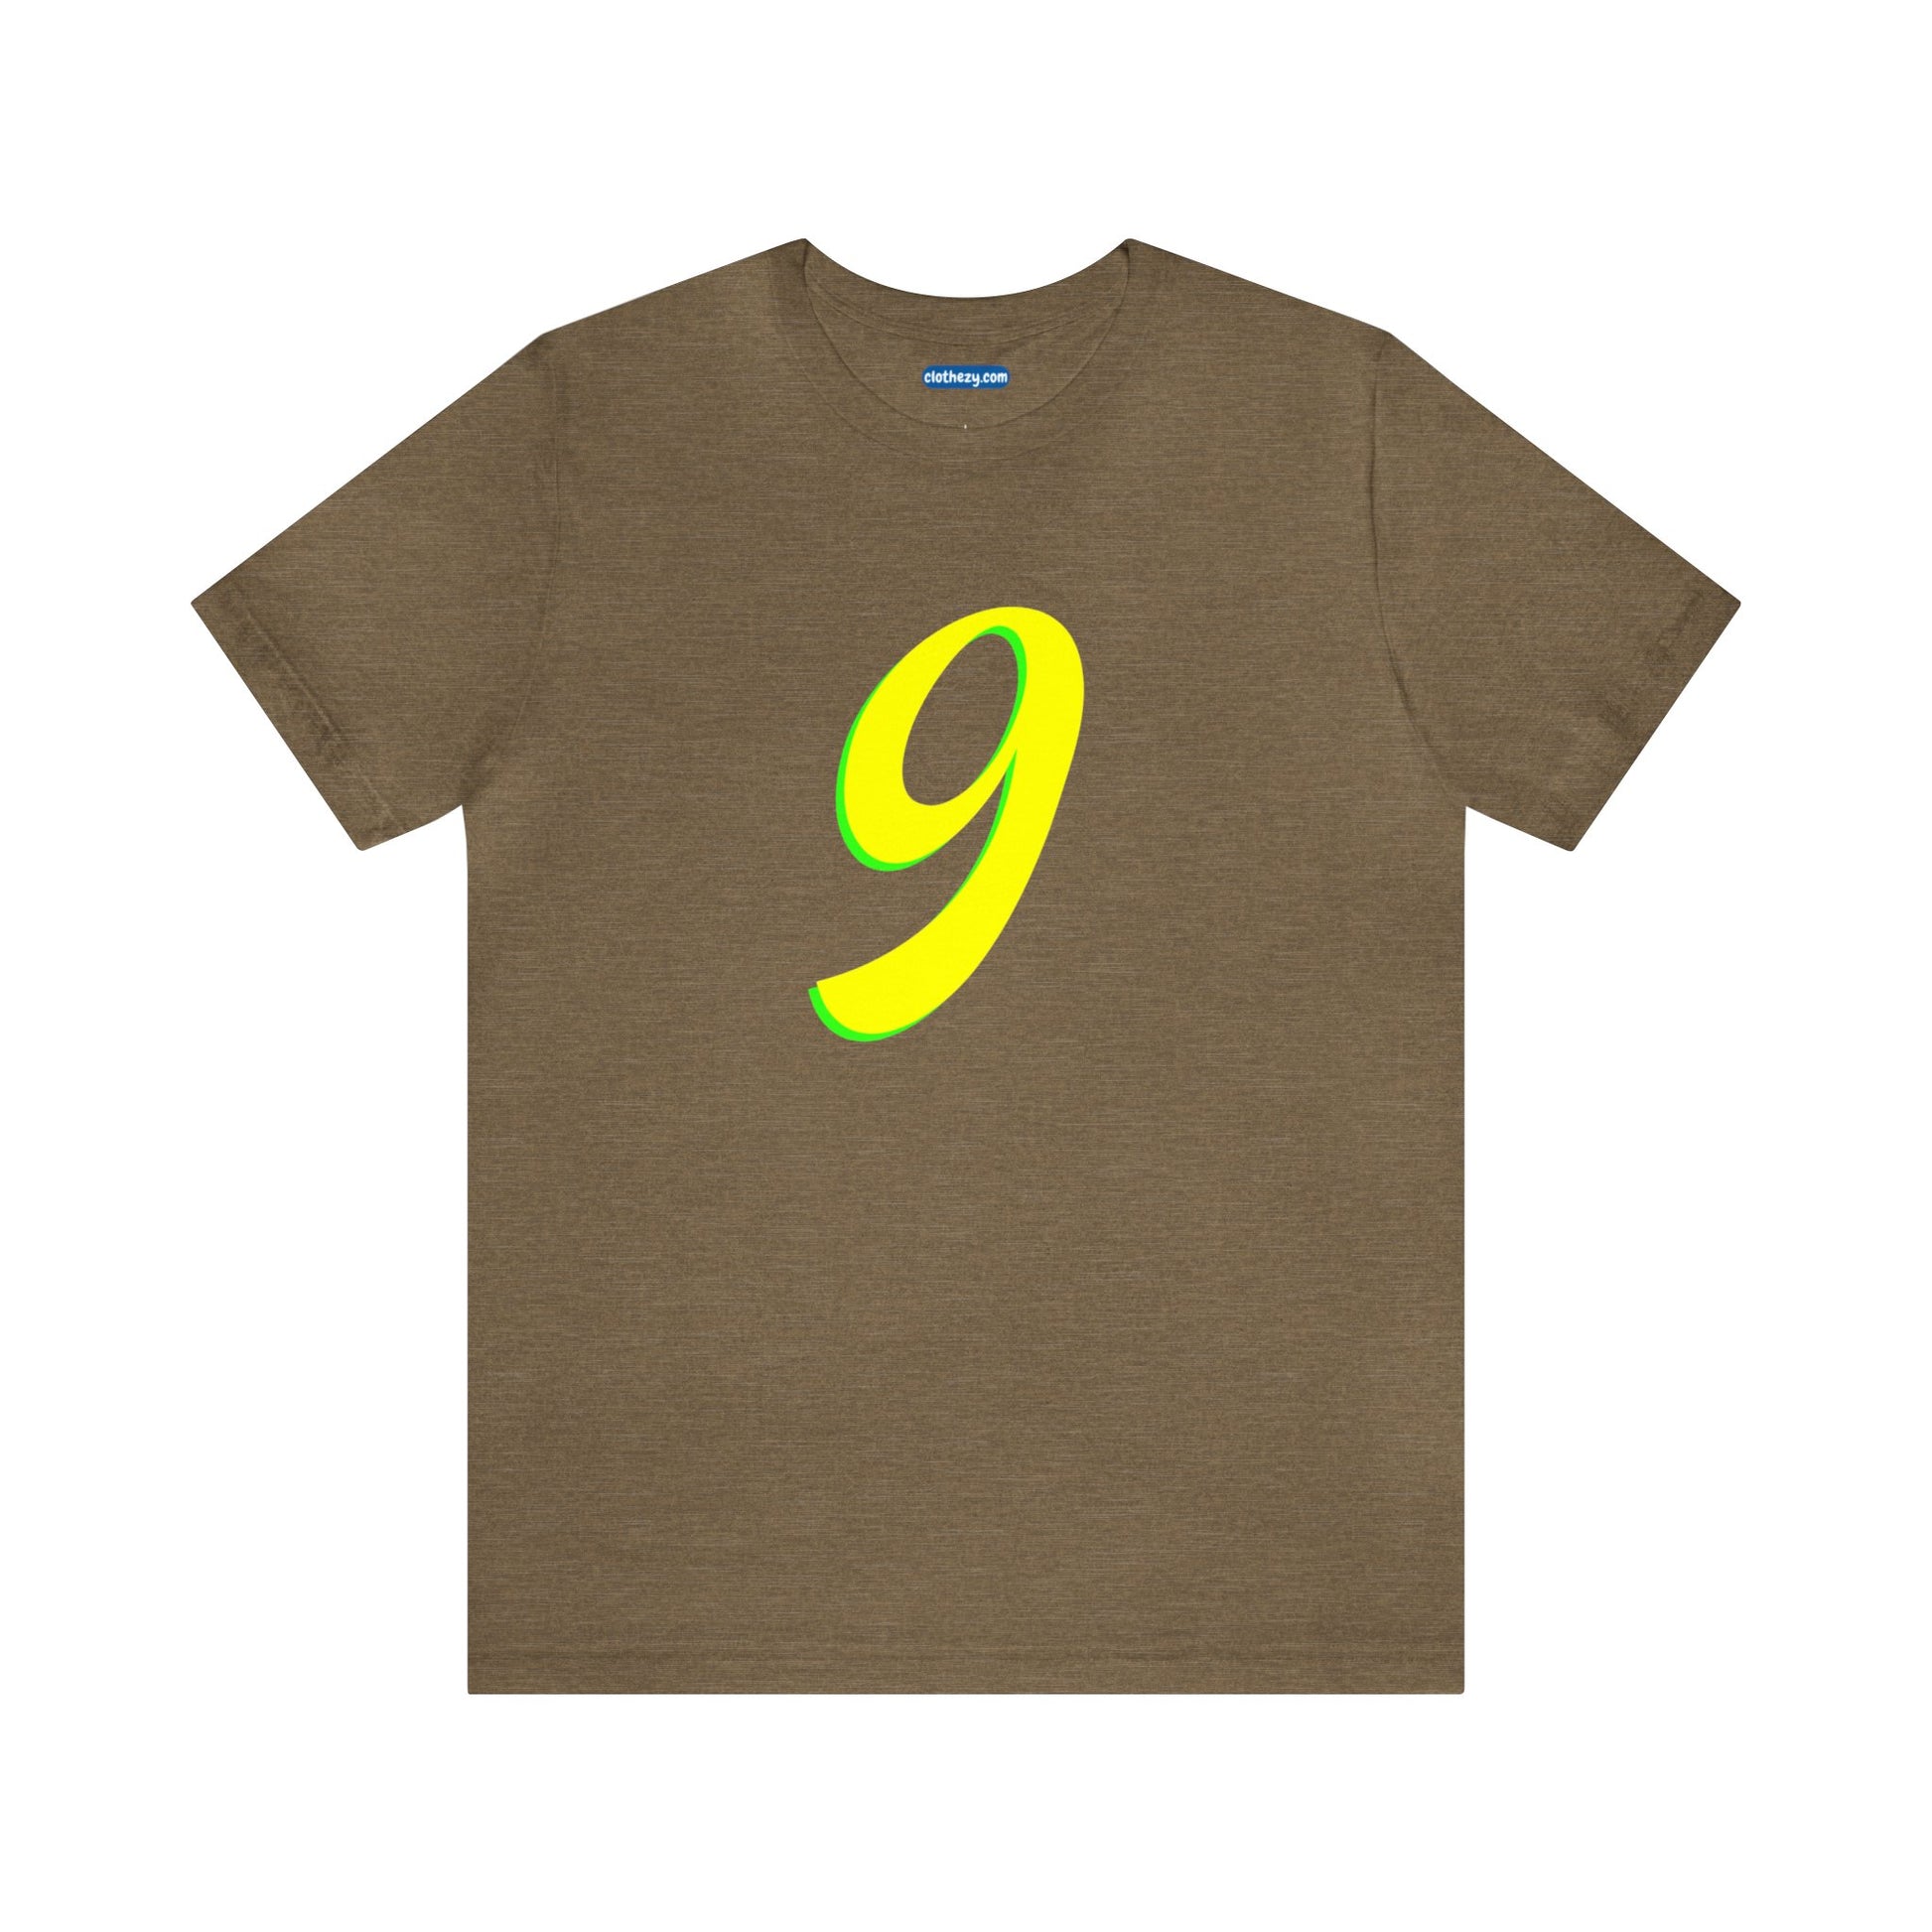 Number 9 Design - Soft Cotton Tee for birthdays and celebrations, Gift for friends and family, Multiple Options by clothezy.com in Olive Heather Size Small - Buy Now